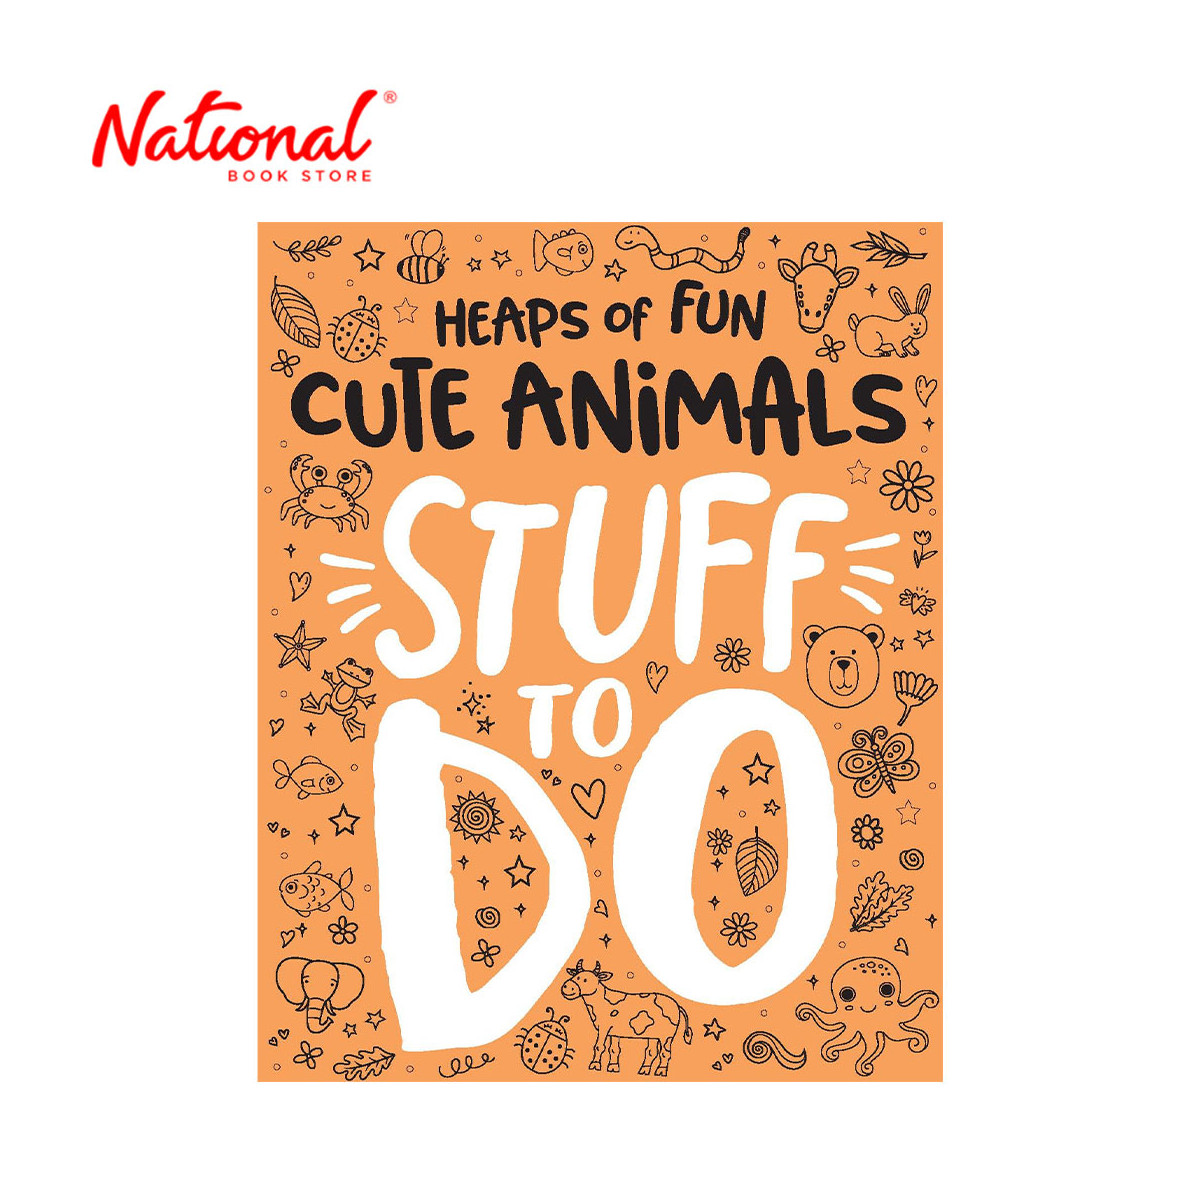 Heaps of Fun Cute Animals Stuff To Do - Trade Paperback - Activity Books for Kids